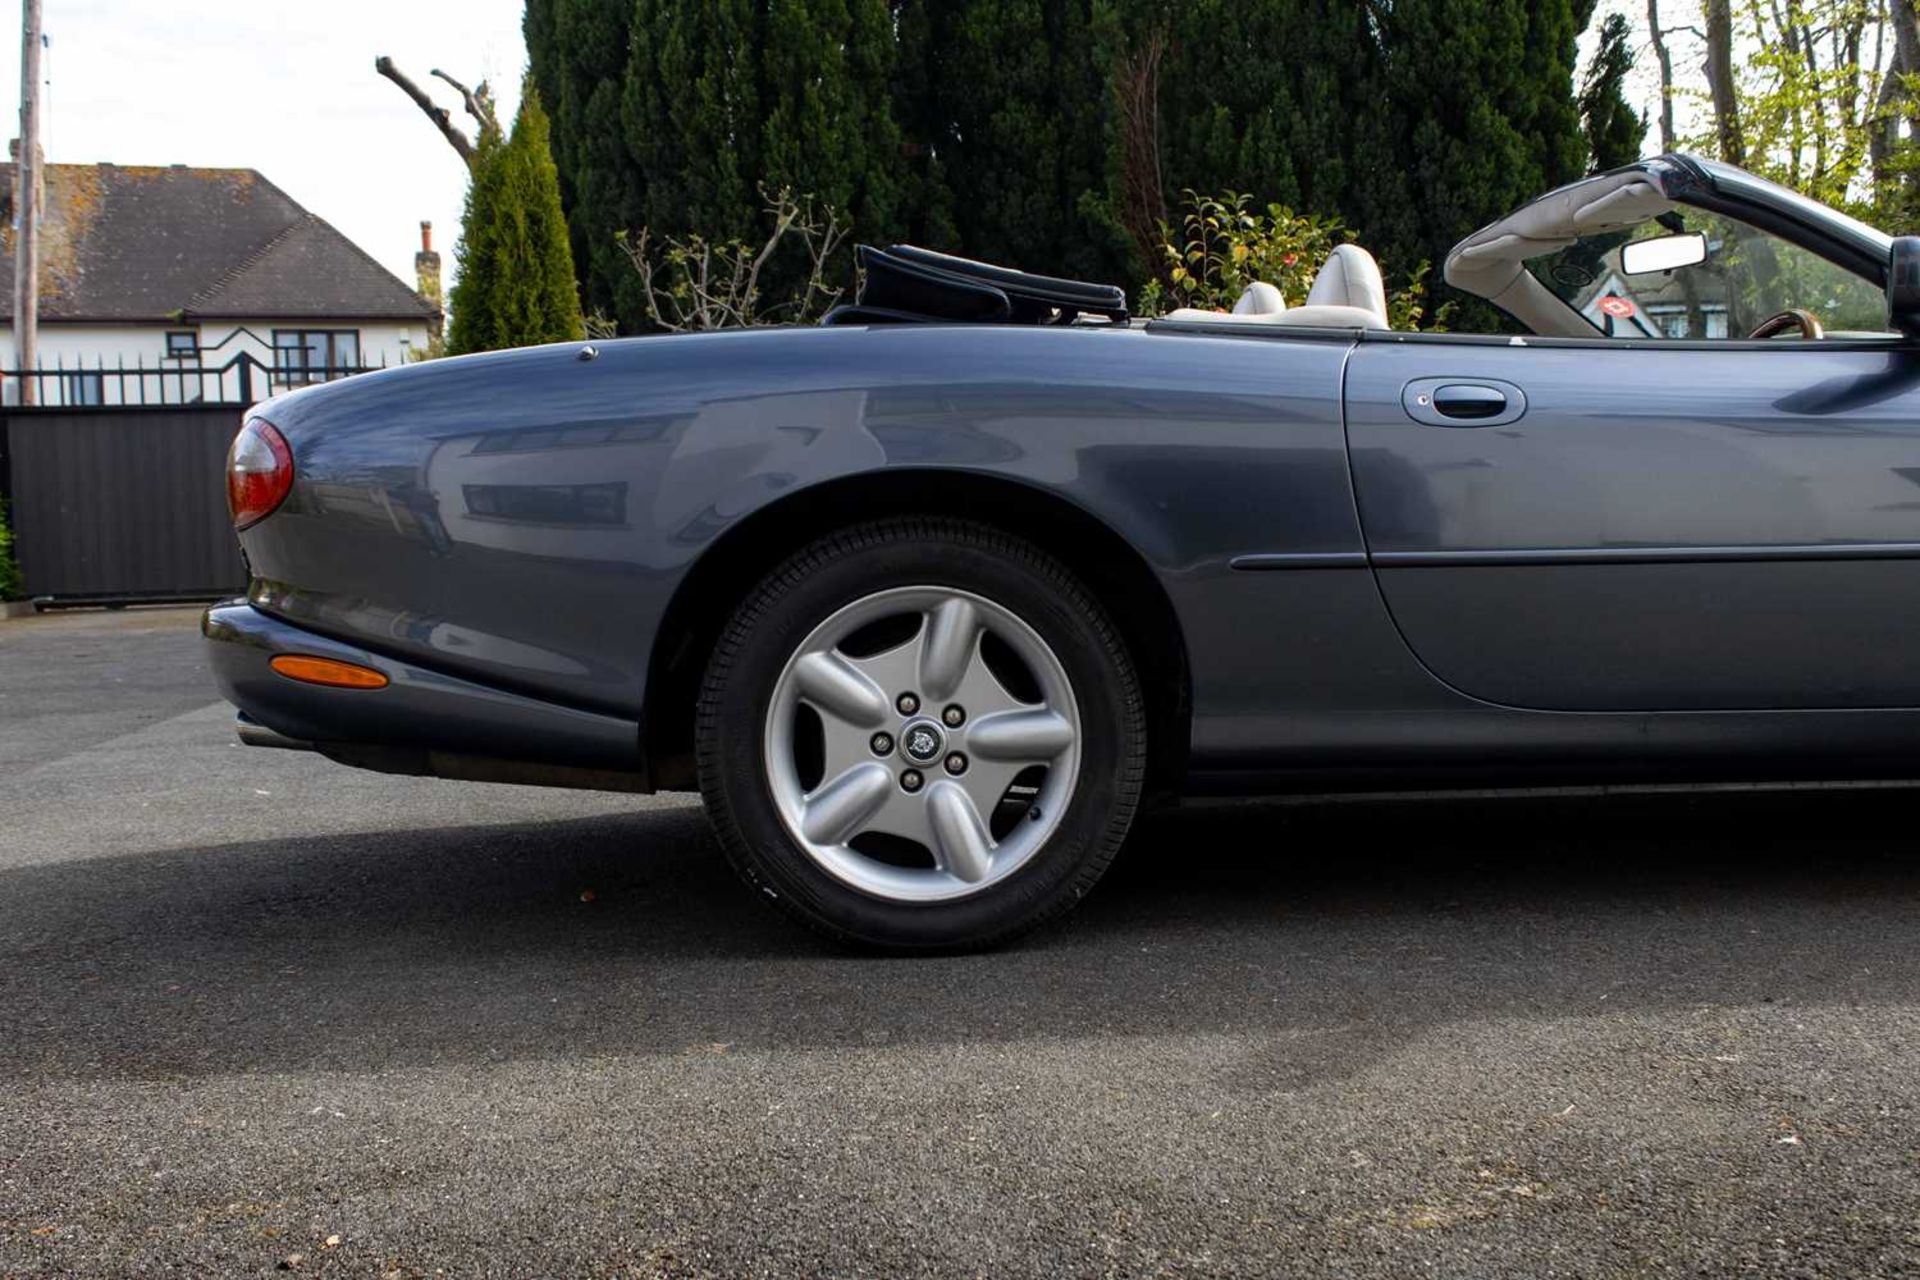 1997 Jaguar XK8 Convertible ***NO RESERVE*** Only one former keeper and full service history  - Image 23 of 89